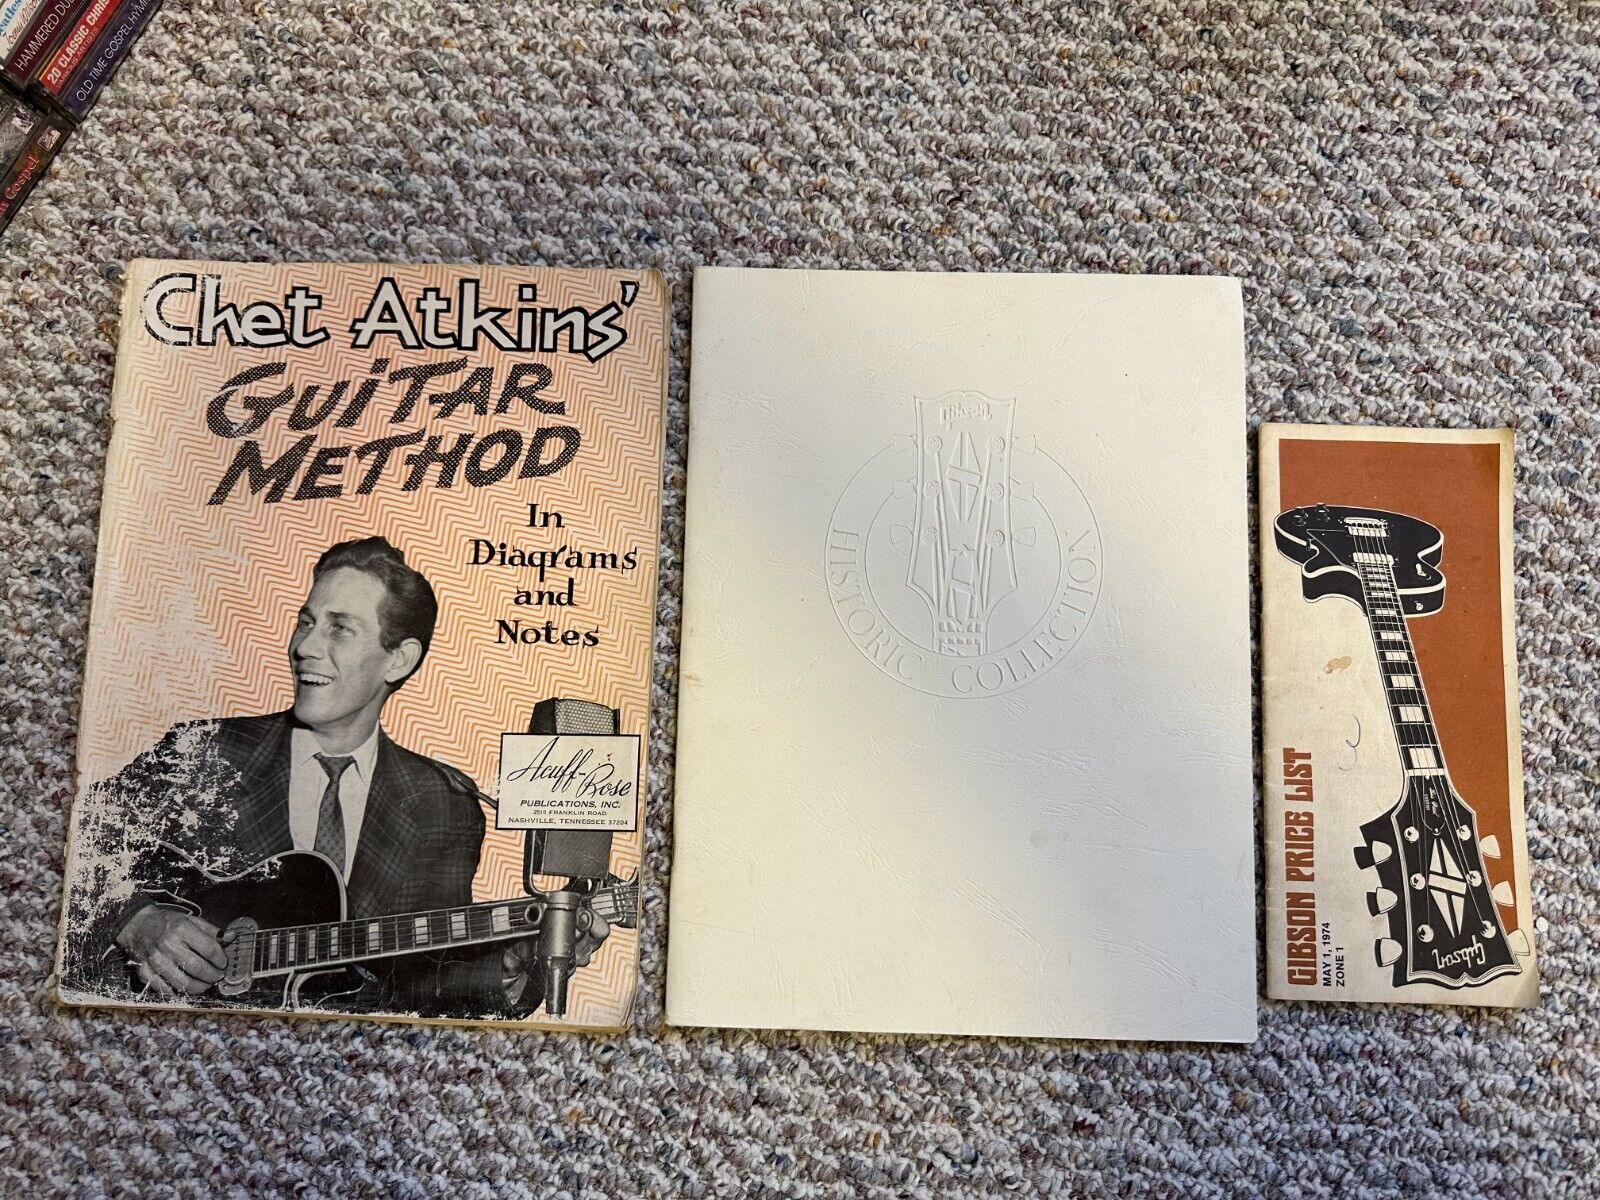 Gibson Historic Collection - Price List May 1, 1974 - Chet Atkins Books